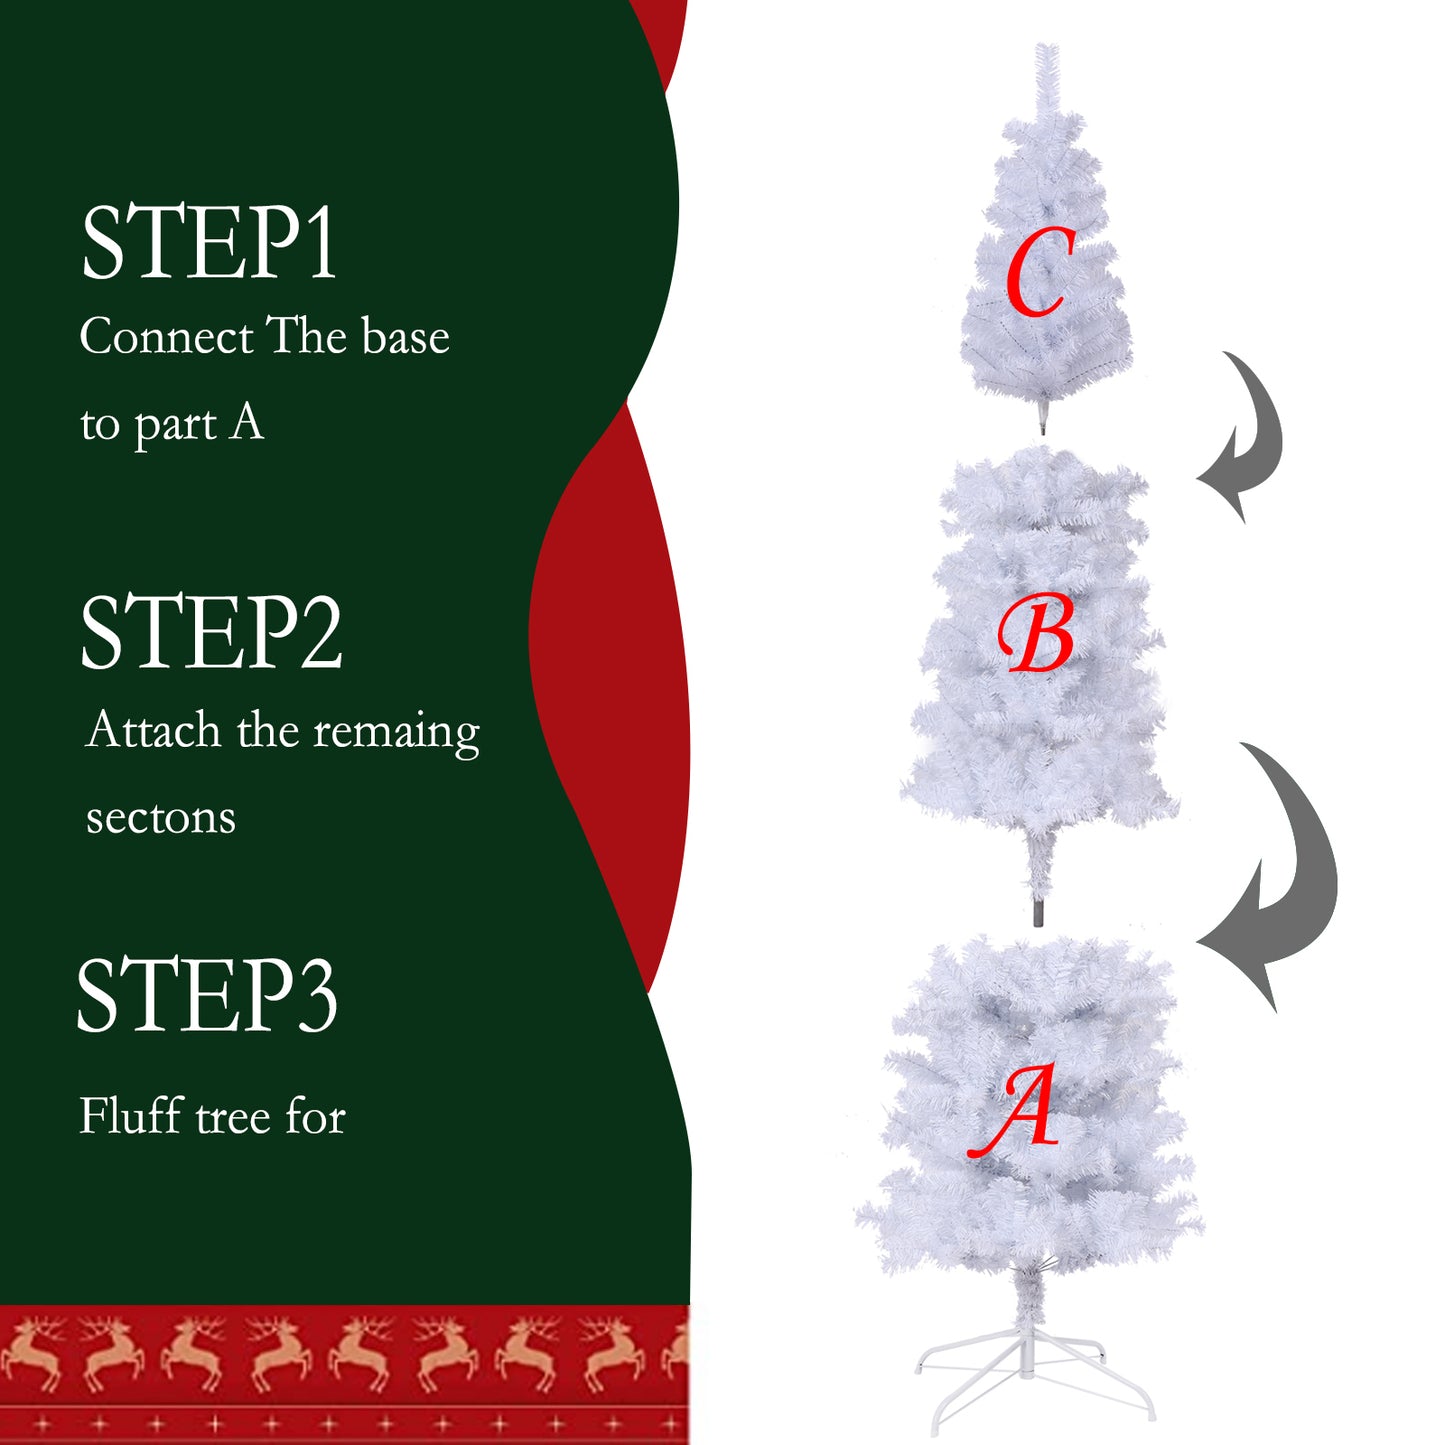 Slim 7.5FT White Artificial Christmas Tree with Foldable Metal Stand